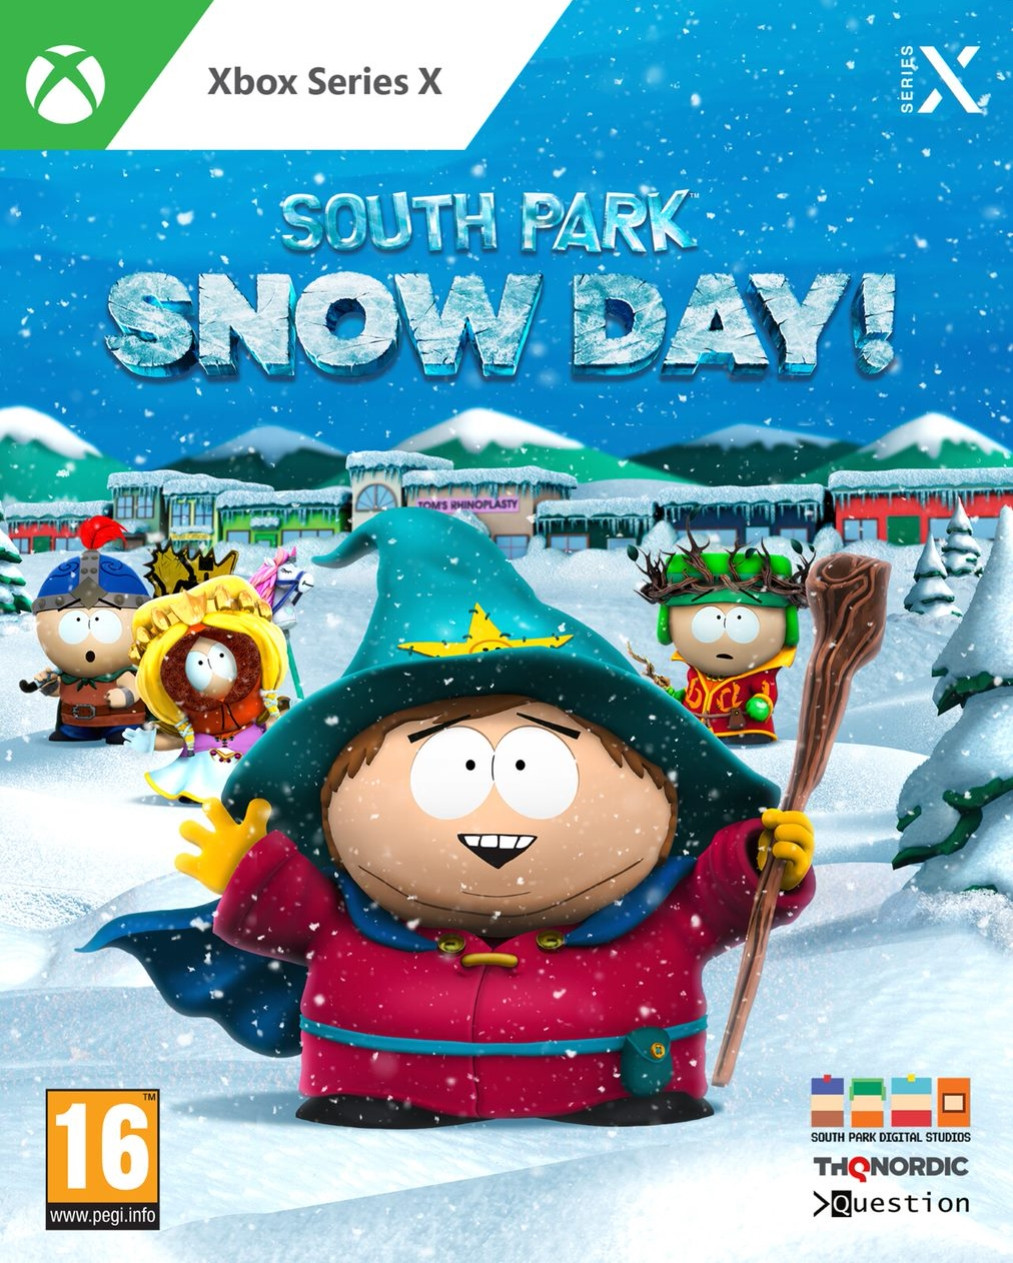 South Park - Snow Day! (Xbox Series X), THQ Nordic